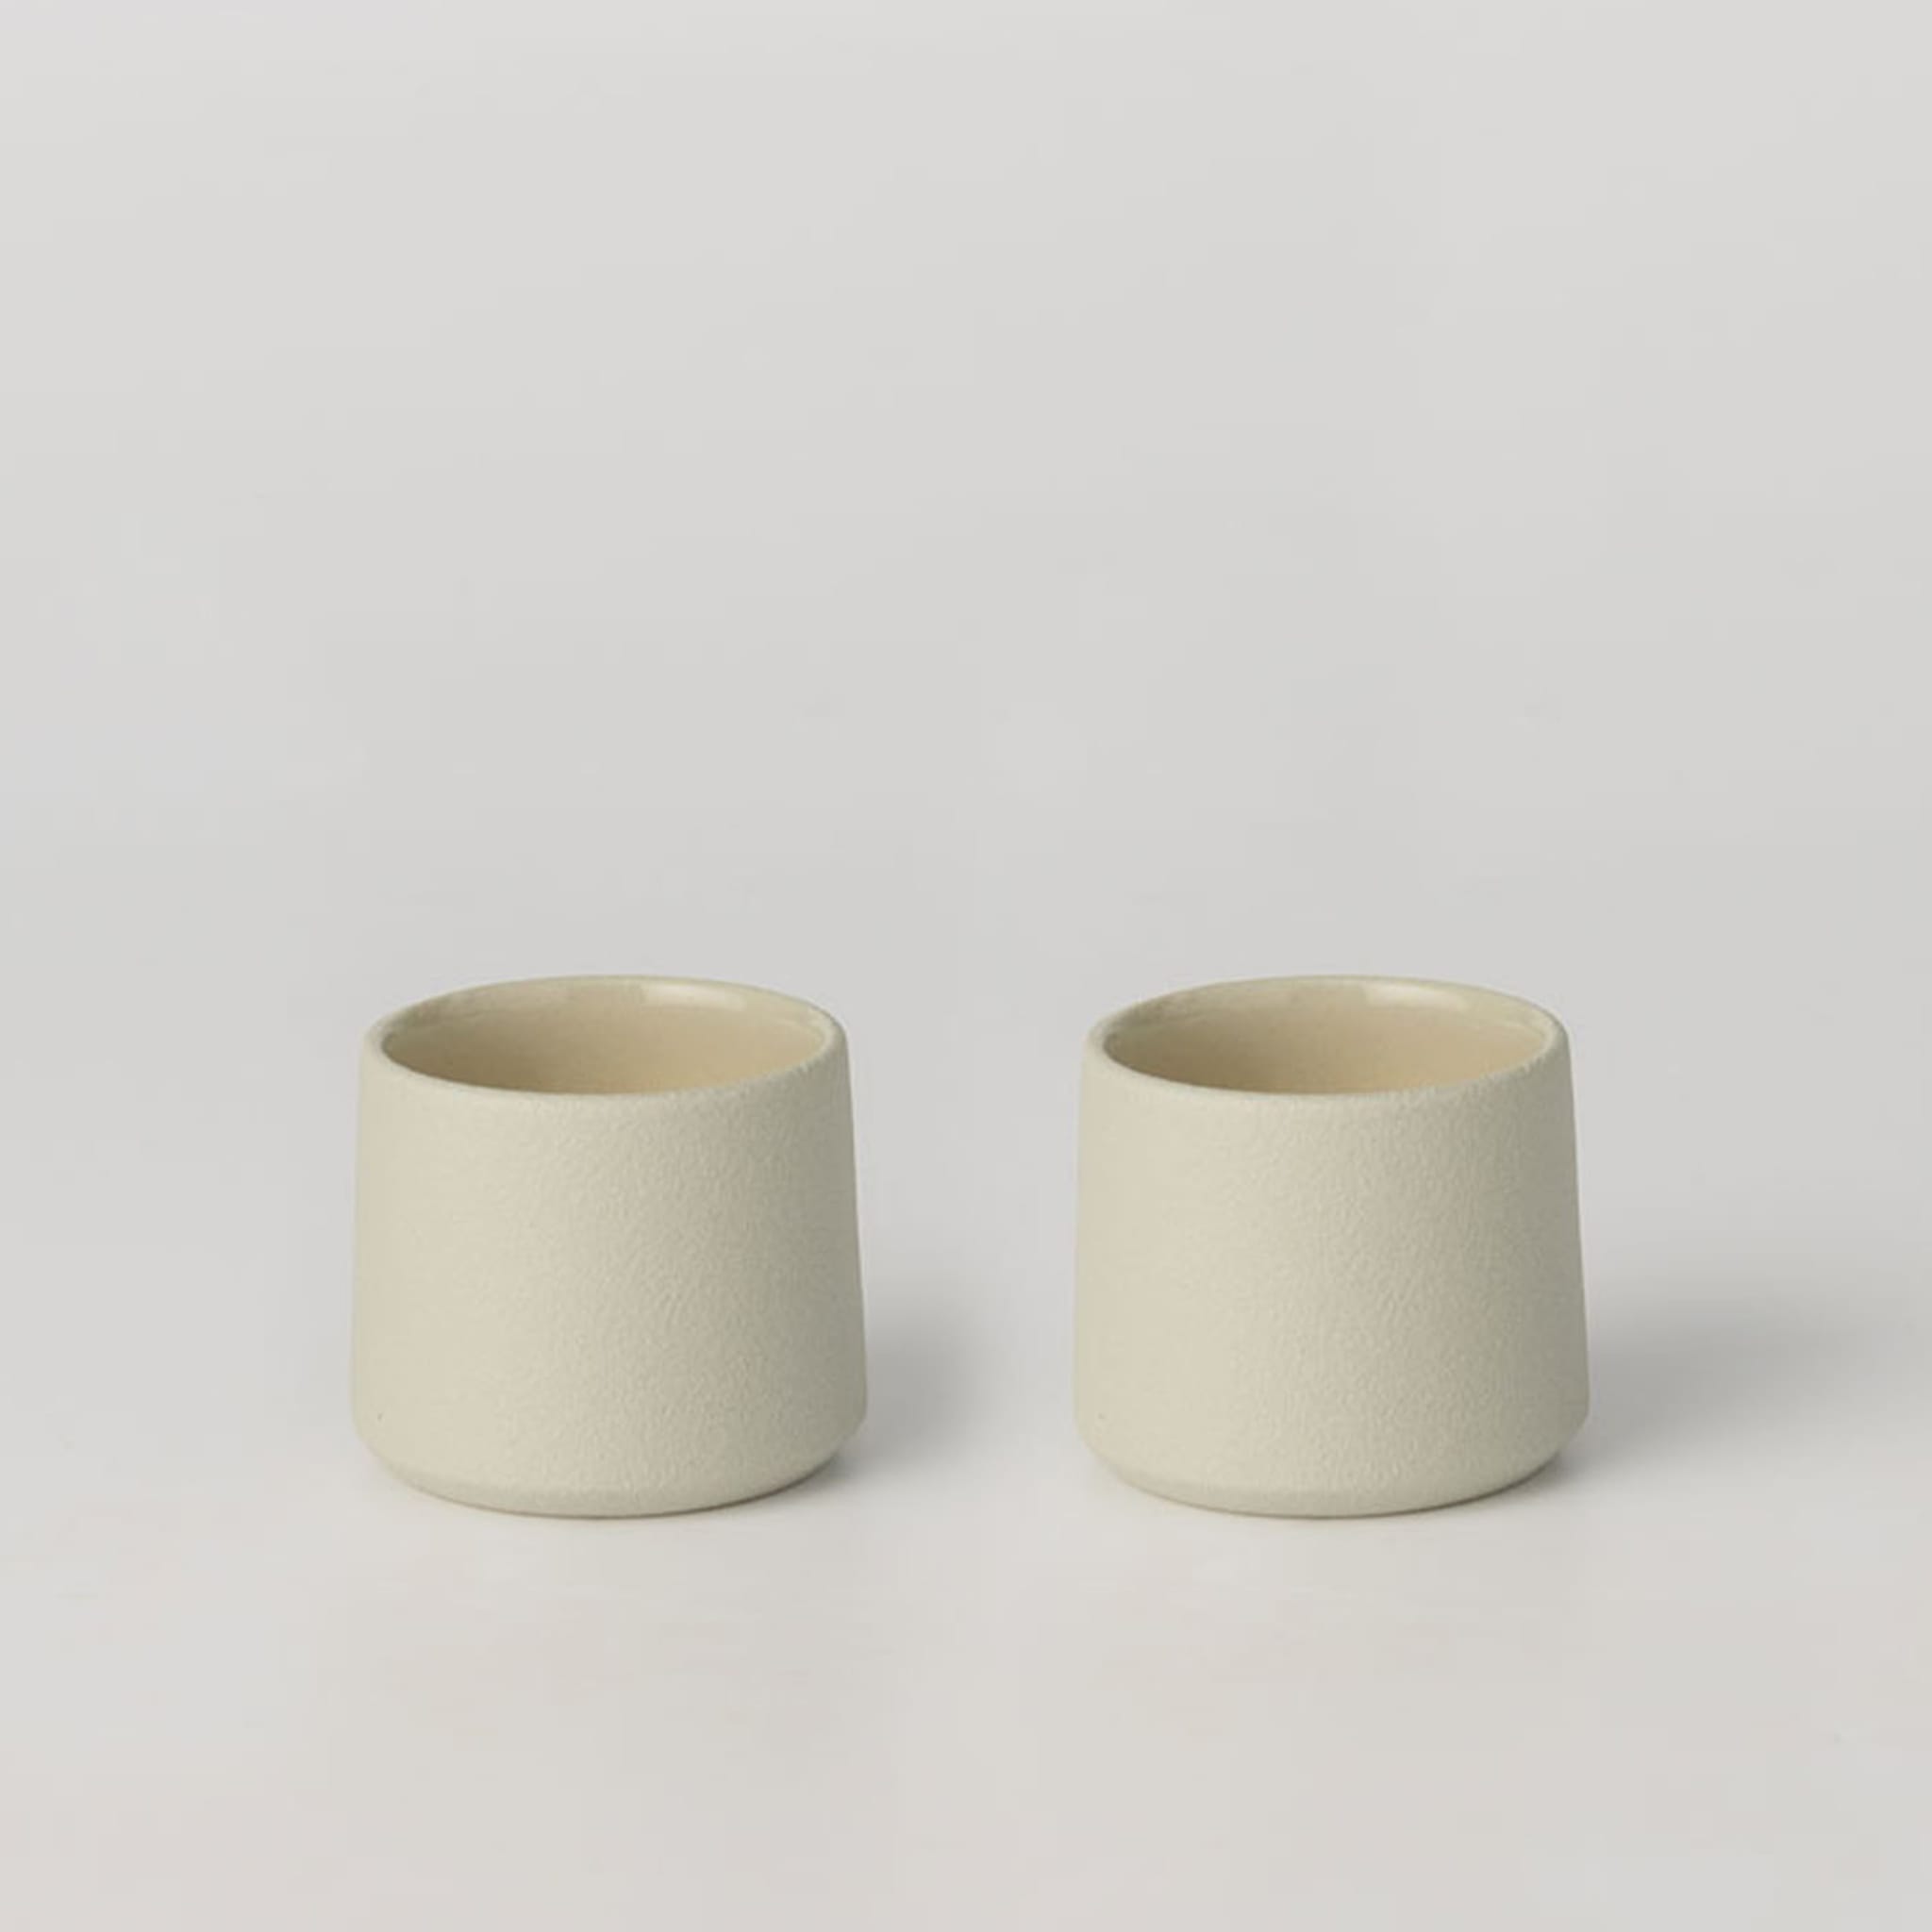 Two Sets of 2 Coffee Cups  - Alternative view 1